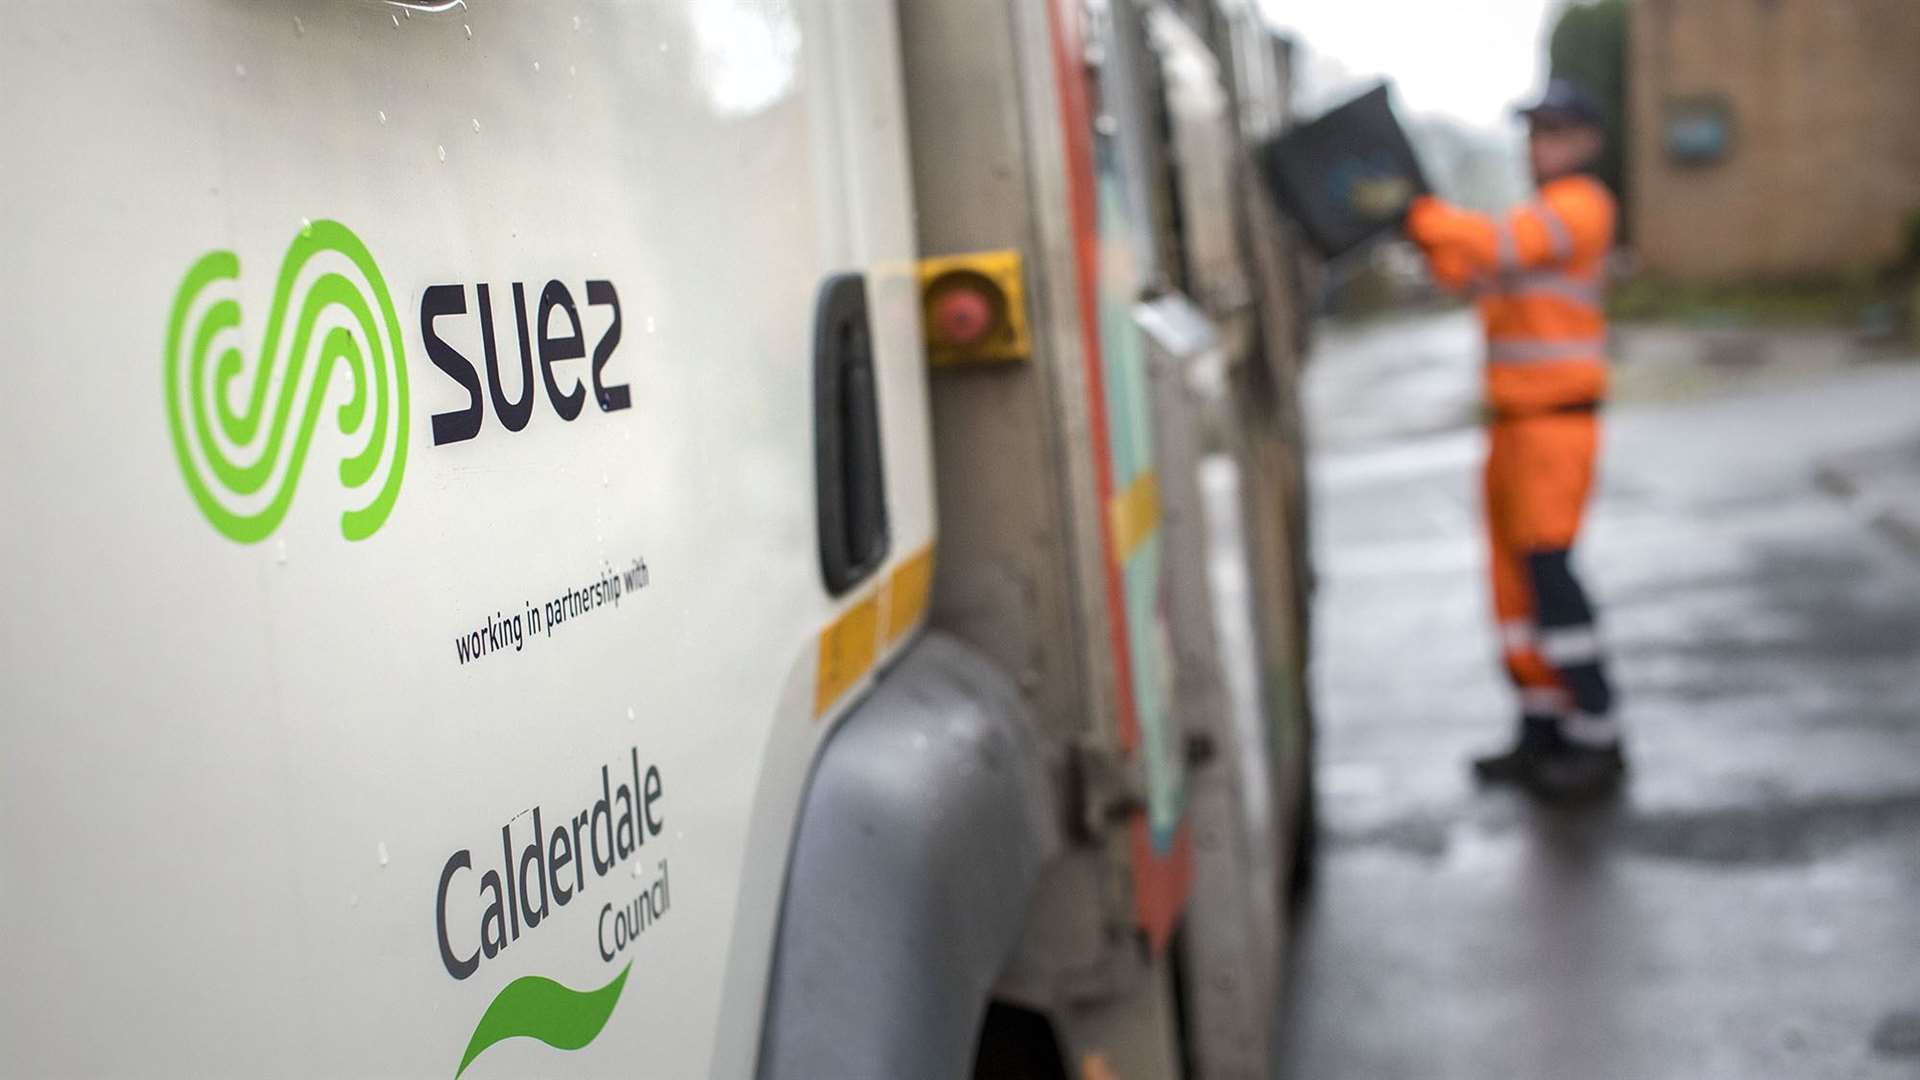 Suez has won the new waste collection contract. Picture: Paul Box